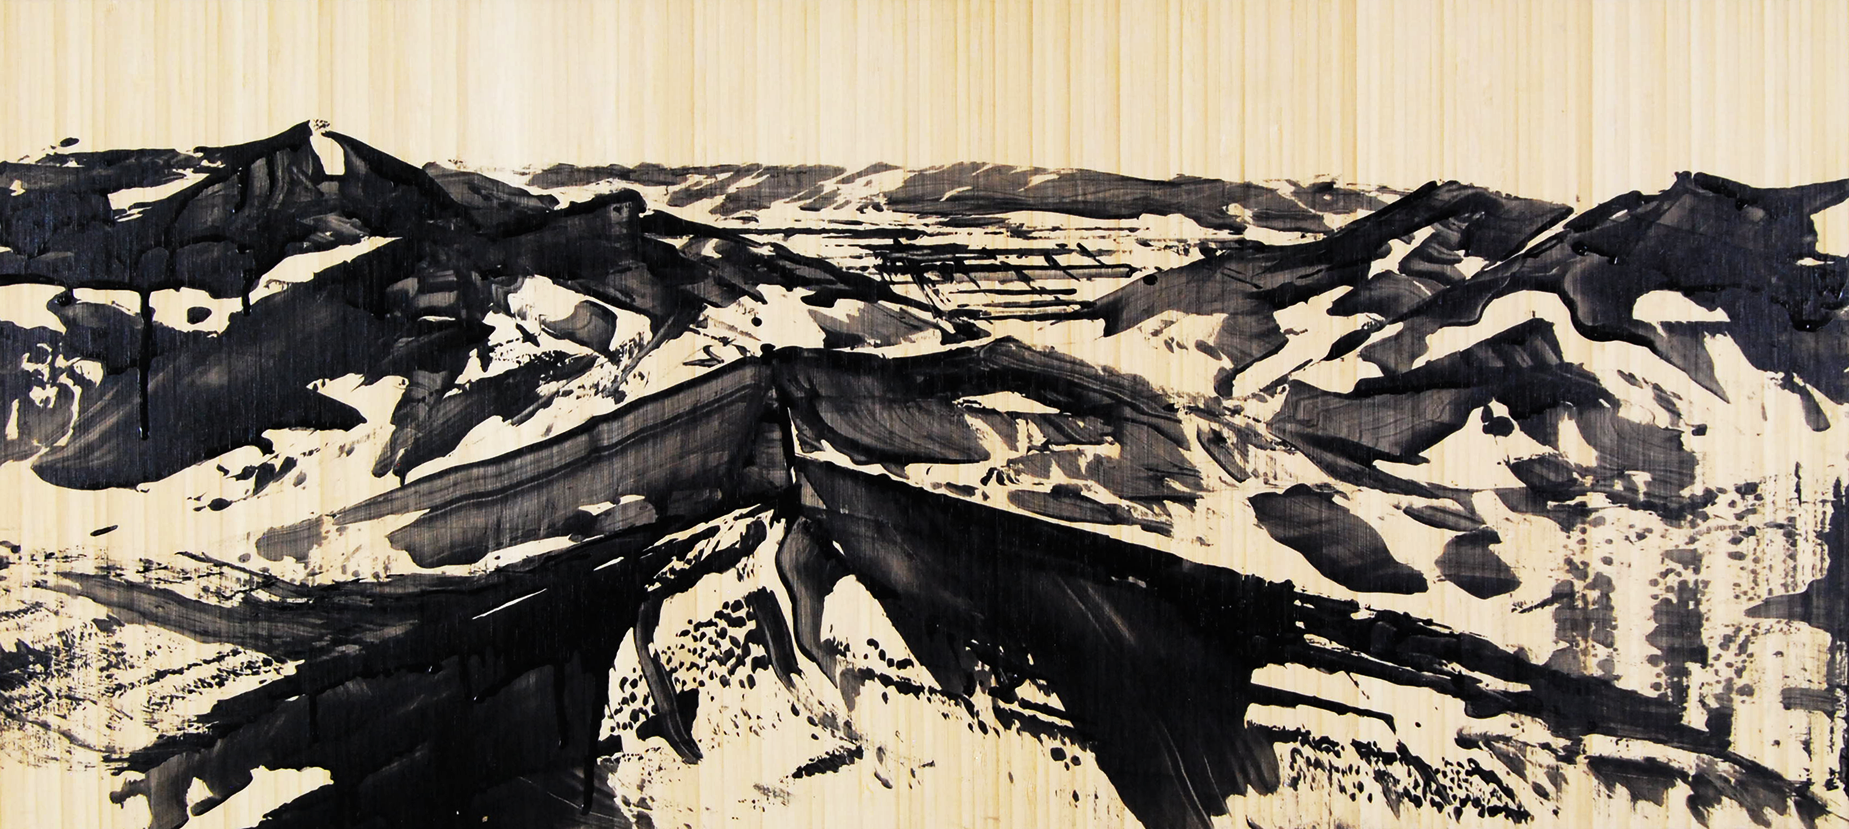 "View from 9,990", 22x36, Enamel on Bamboo, SOLD